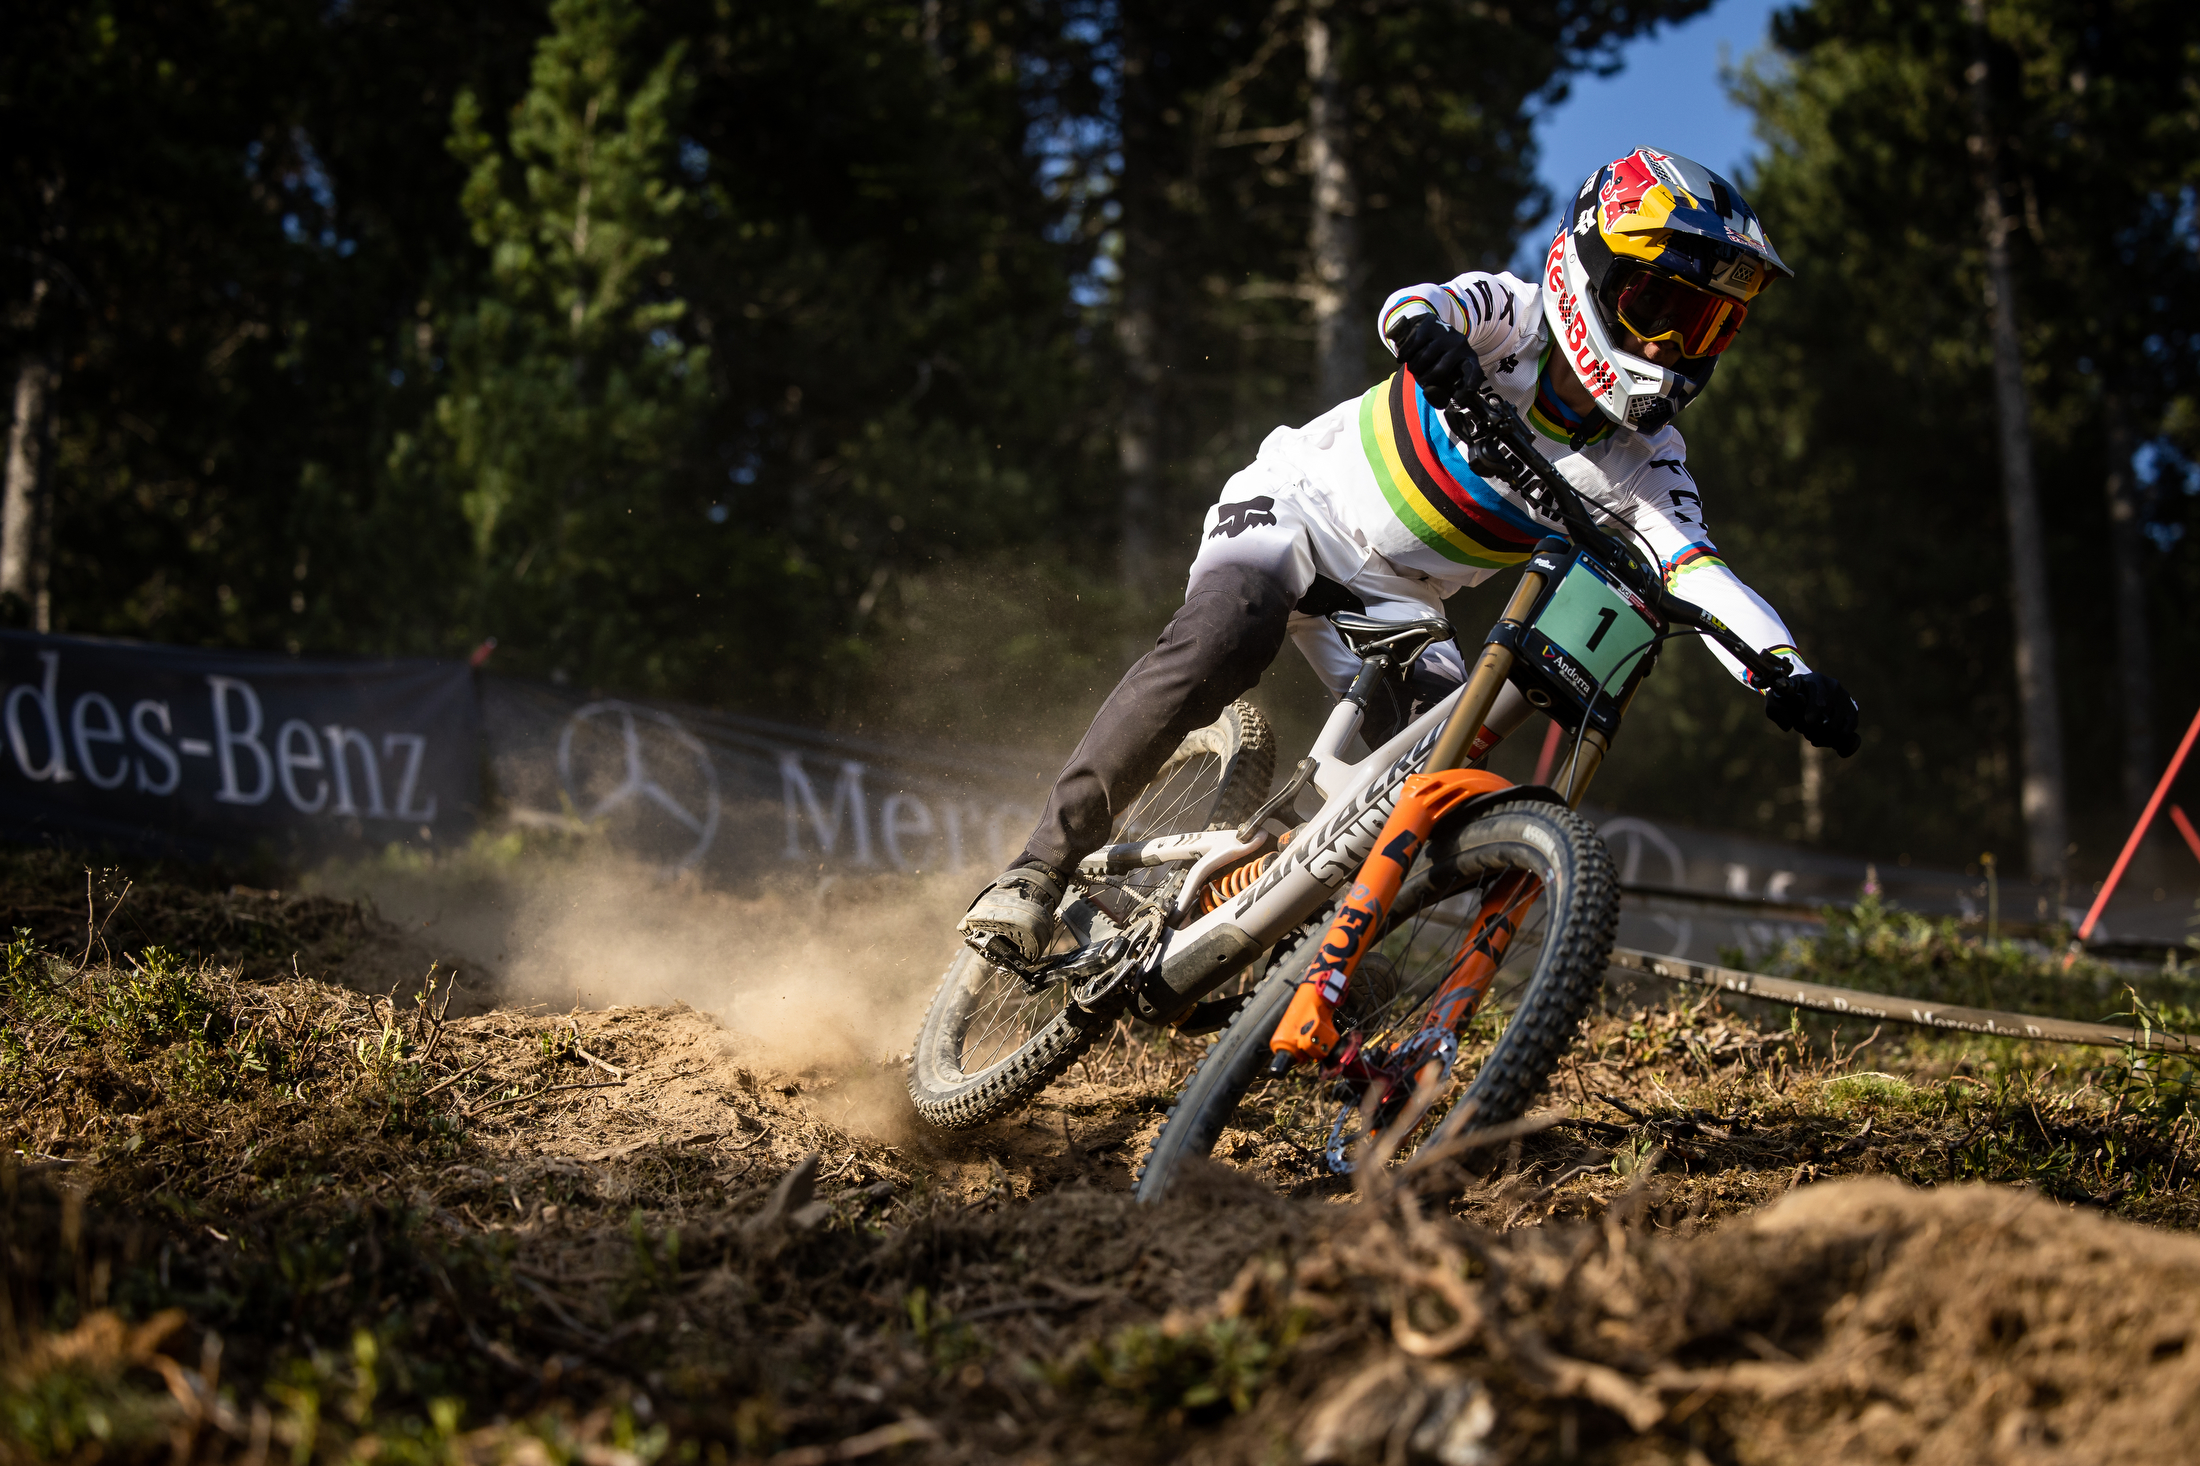 Jackson ripping down the Vallnord course